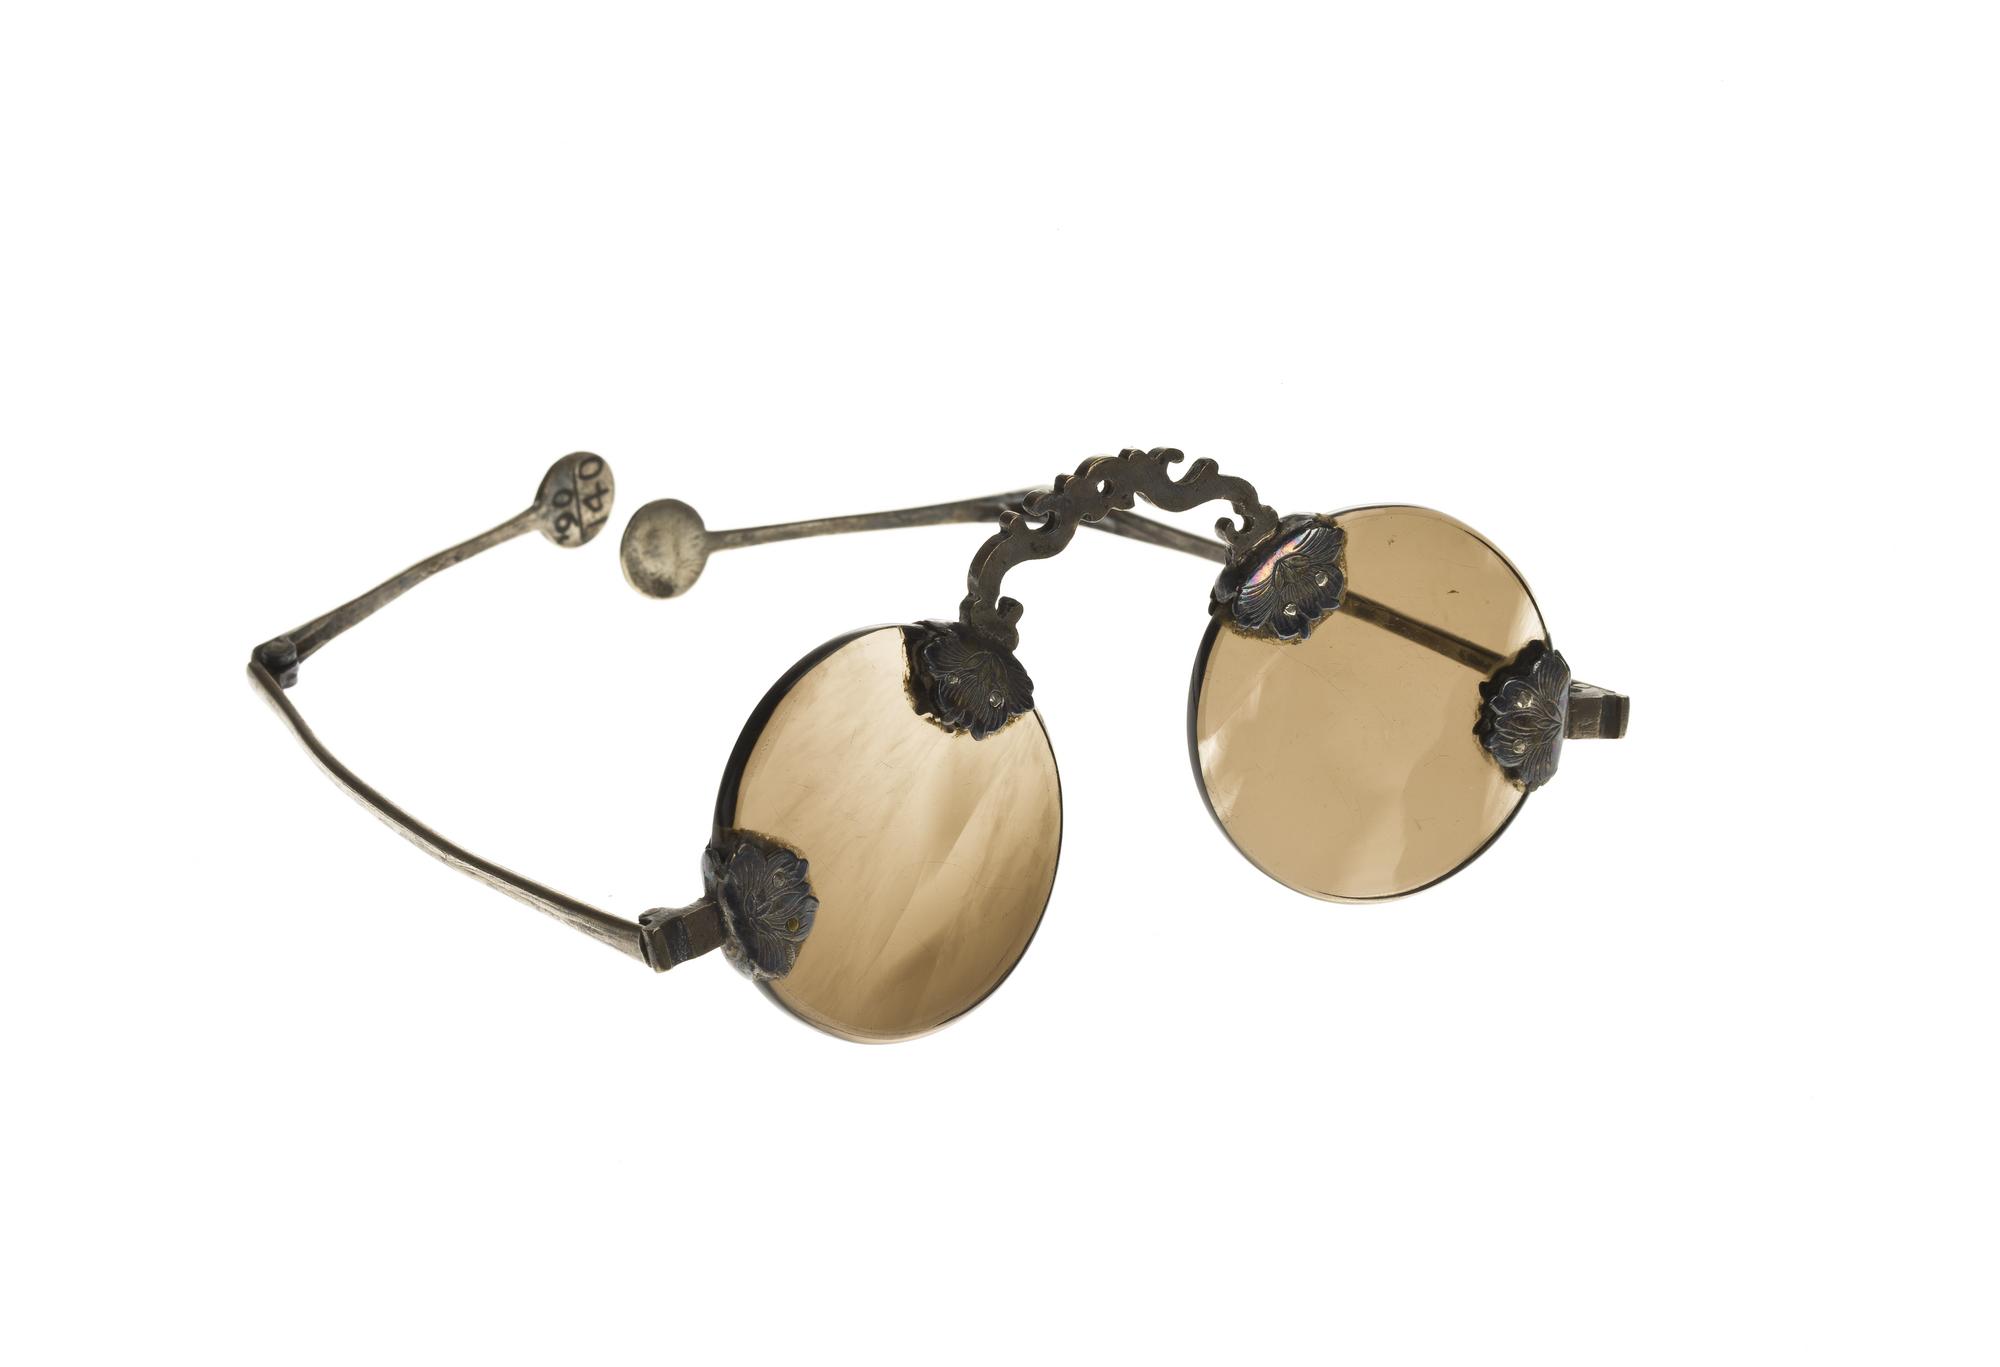 Pair of spectacles of smoky quartz, with engraved silver mounts and folding jointed legs: China, late 19th century.